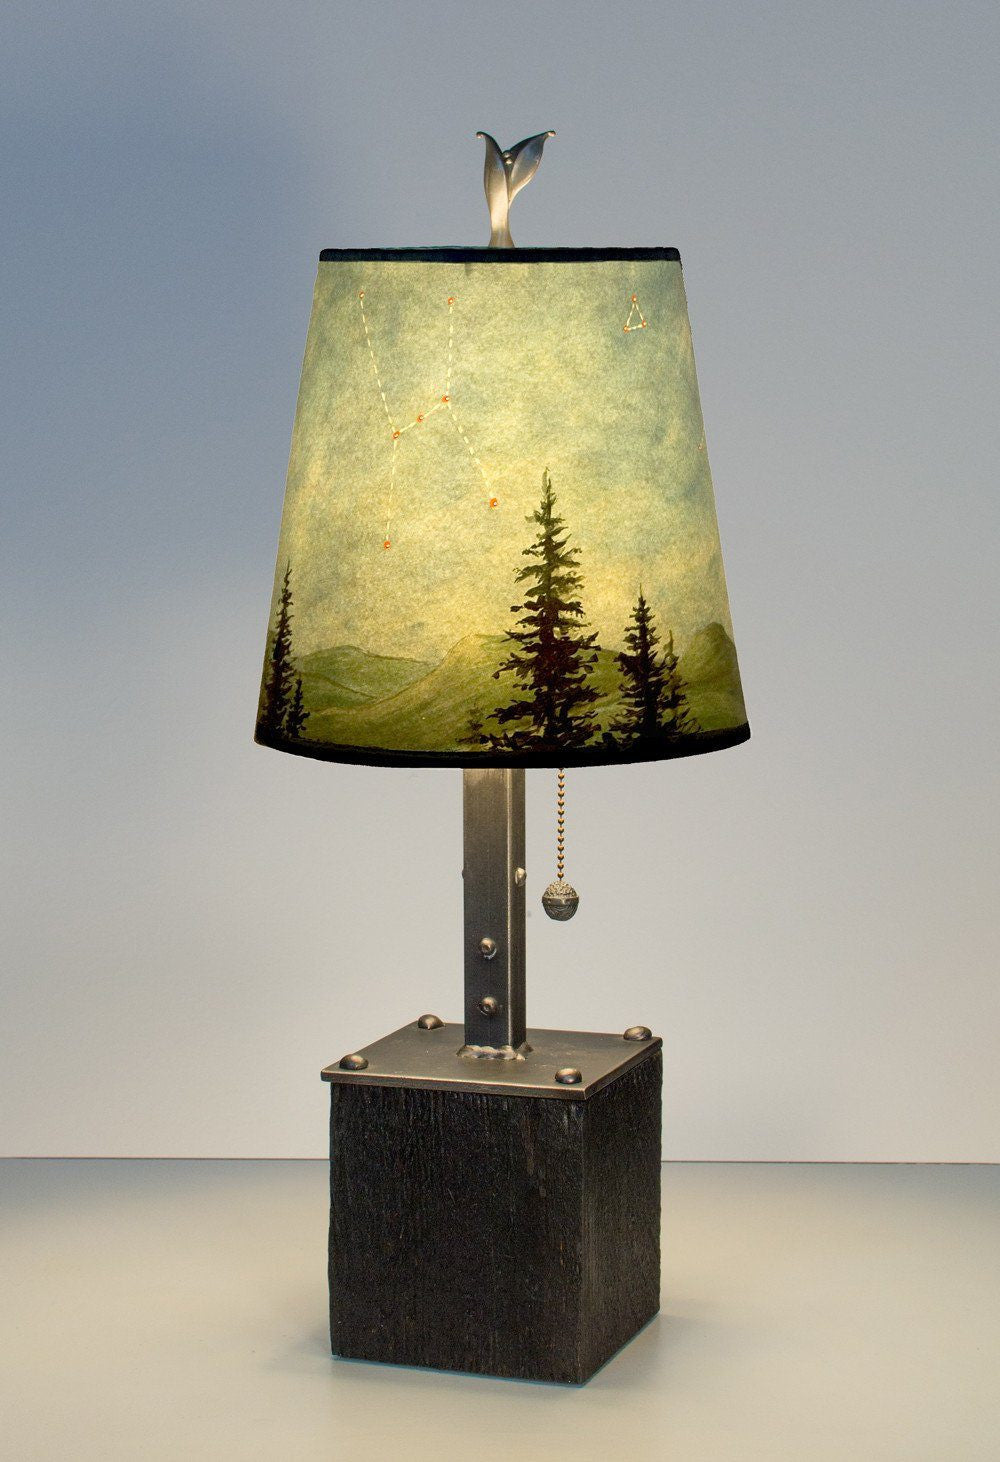 Janna Ugone &amp; Co Table Lamps Steel Table Lamp on Reclaimed Wood with Small Drum Shade in Midnight Sky